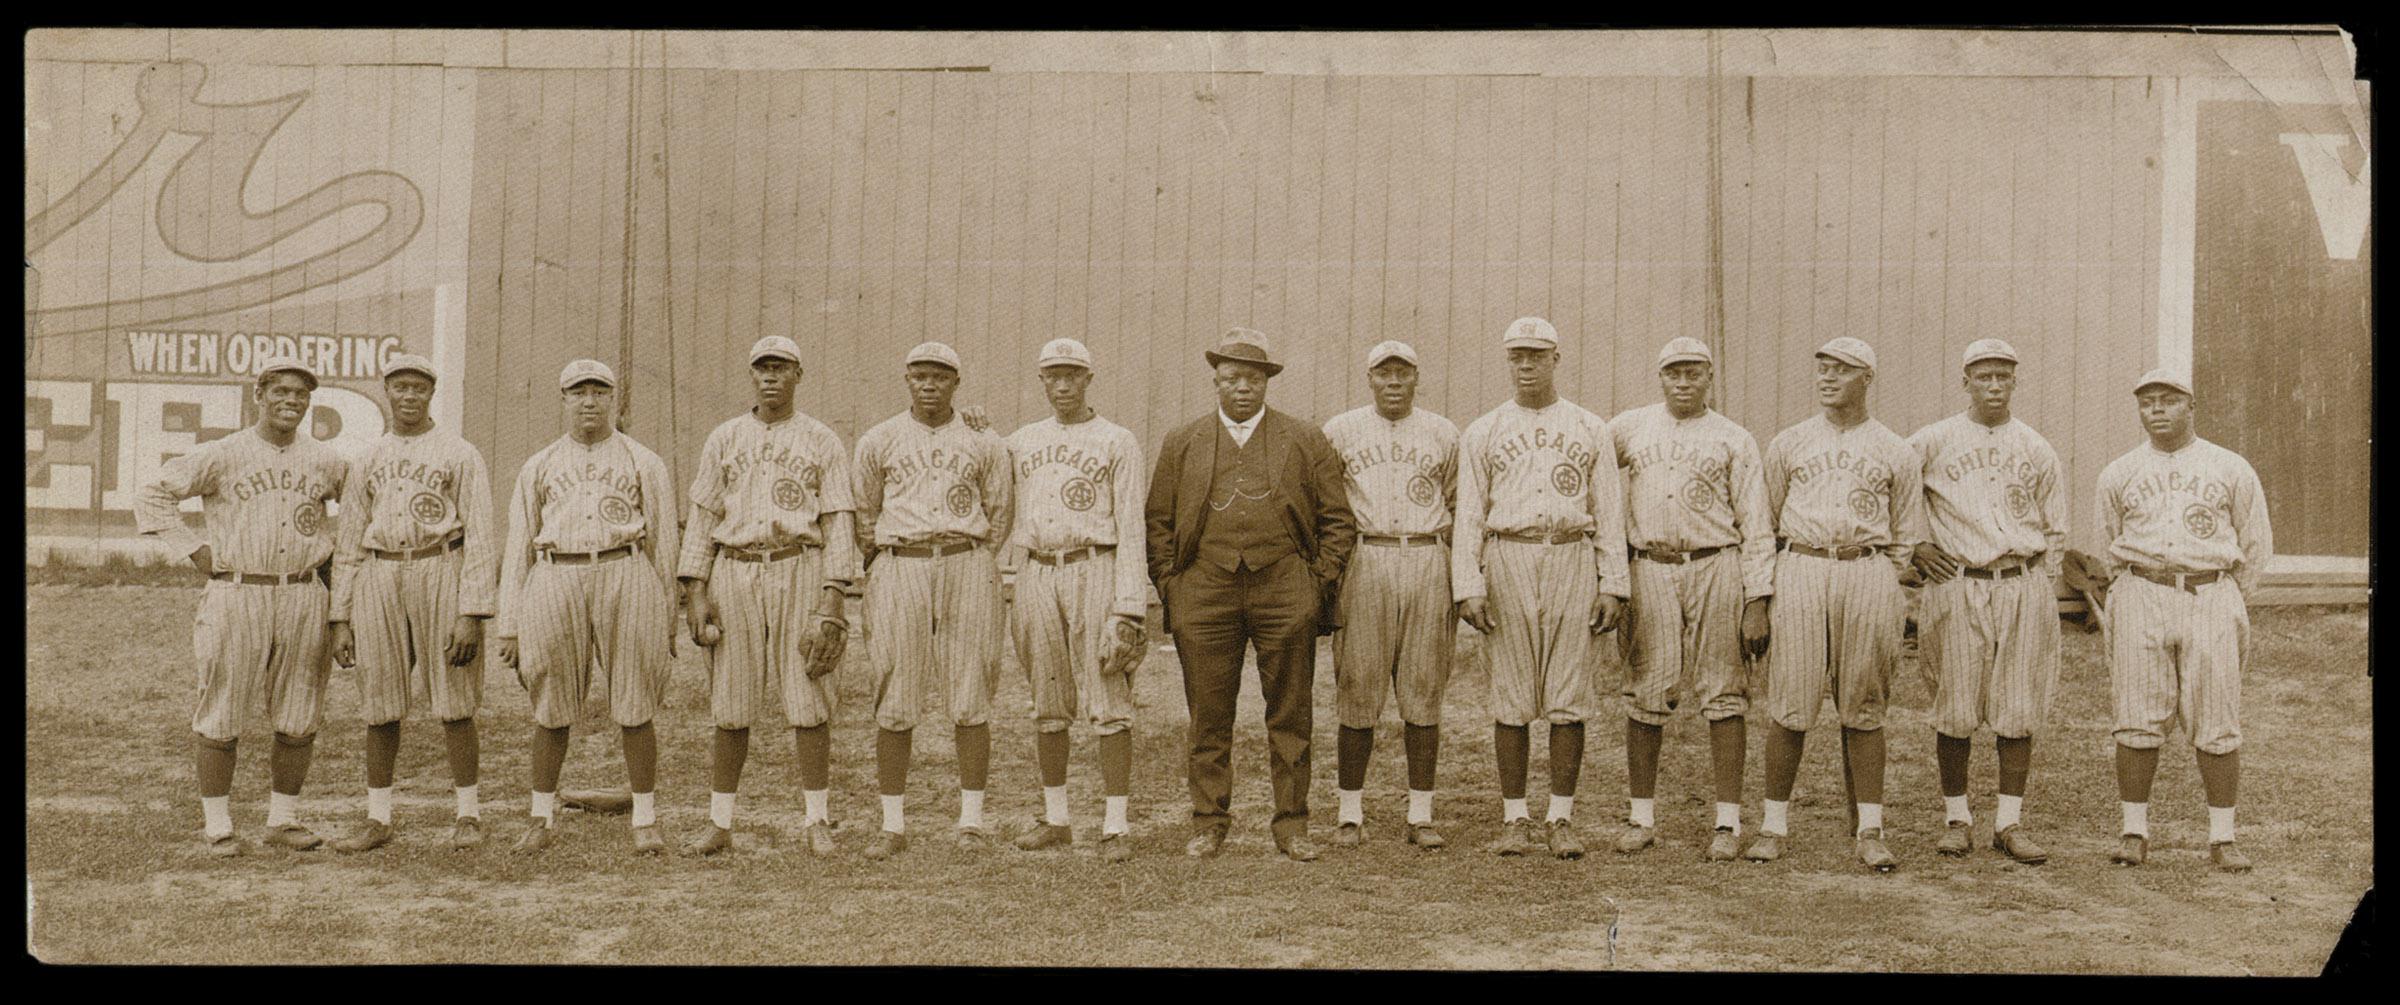 The only known photograph of Edgar Washington’s pitching days with the 1916 Chicago American Giants (left to right): Pete Hill, Harry Bauchman, Steve Dixon, Tom Johnson, Judy Gans, Bruce Petway, Rube Foster, Leroy Grant, Edgar Washington, Unknown #1 (Possibly C. Bernice Wood), John Henry “Pop” Lloyd, Unknown #2 (Possibly Clarkson Brazelton), and Frank Duncan. Note: This panoramic photo was taken by Stuart Thomson in mid-April 1916, inside Athletic Park, Vancouver, British Columbia. It was auctioned in the spring of 2012, by Robert Edward Auctions, and sold for an astounding $38,513.00. Positive player identifications by Gary Ashwill and Mark V. Perkins.